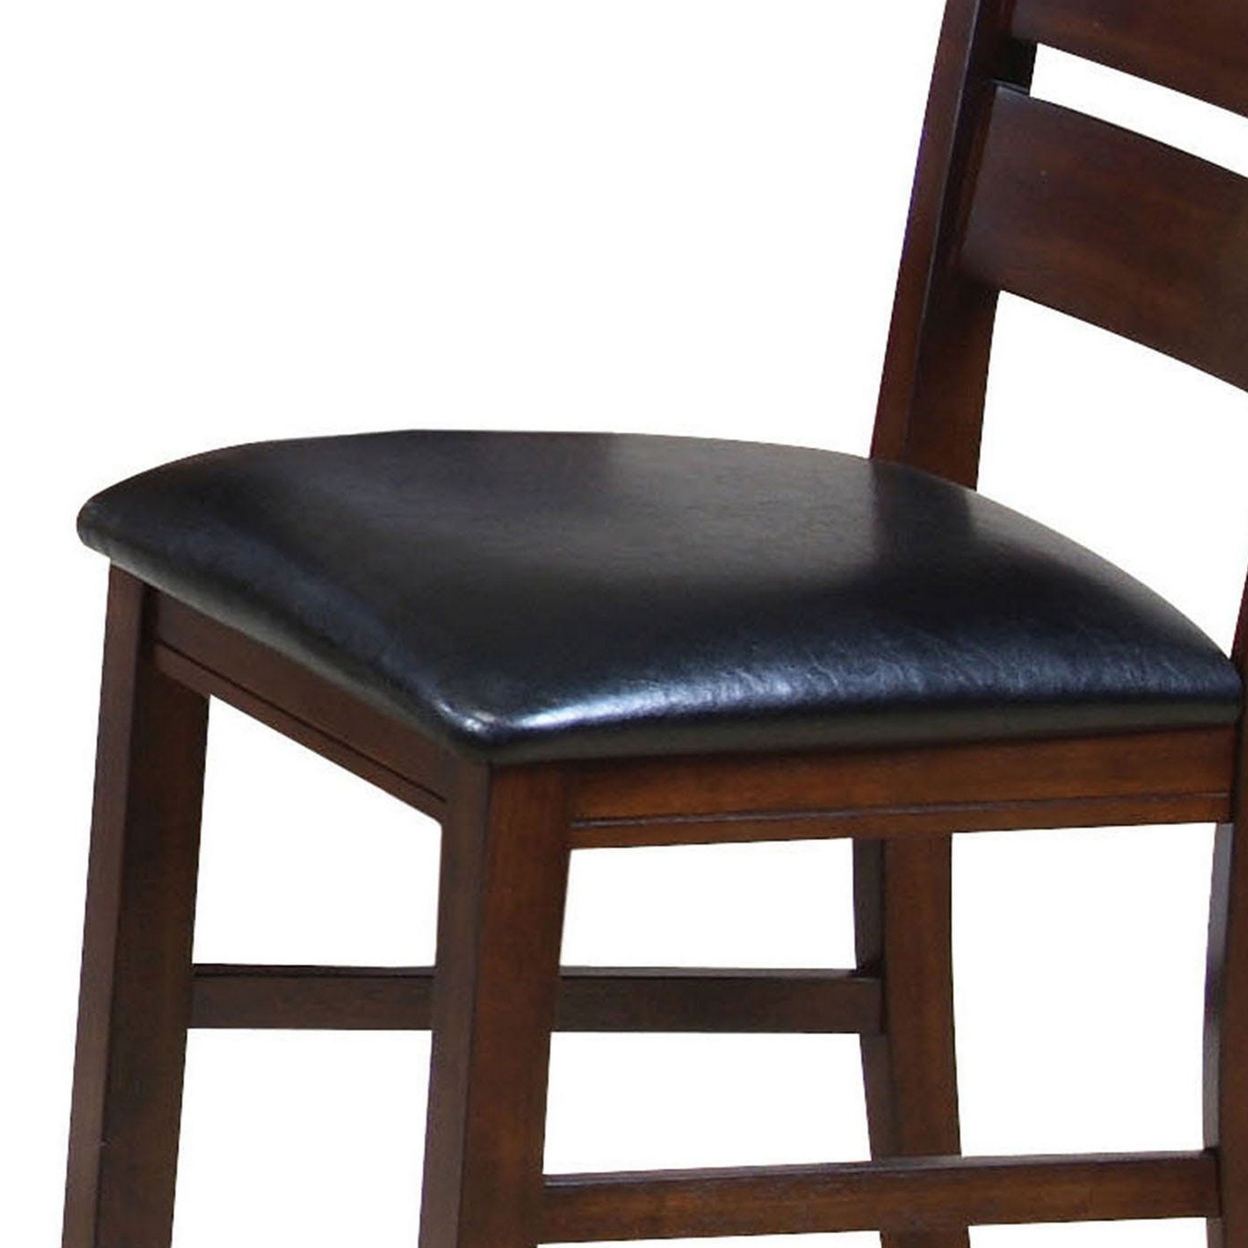 Leather Upholstered Wooden Side Chairs With Ladder Back, Brown & Black, (Set Of 2)- Saltoro Sherpi